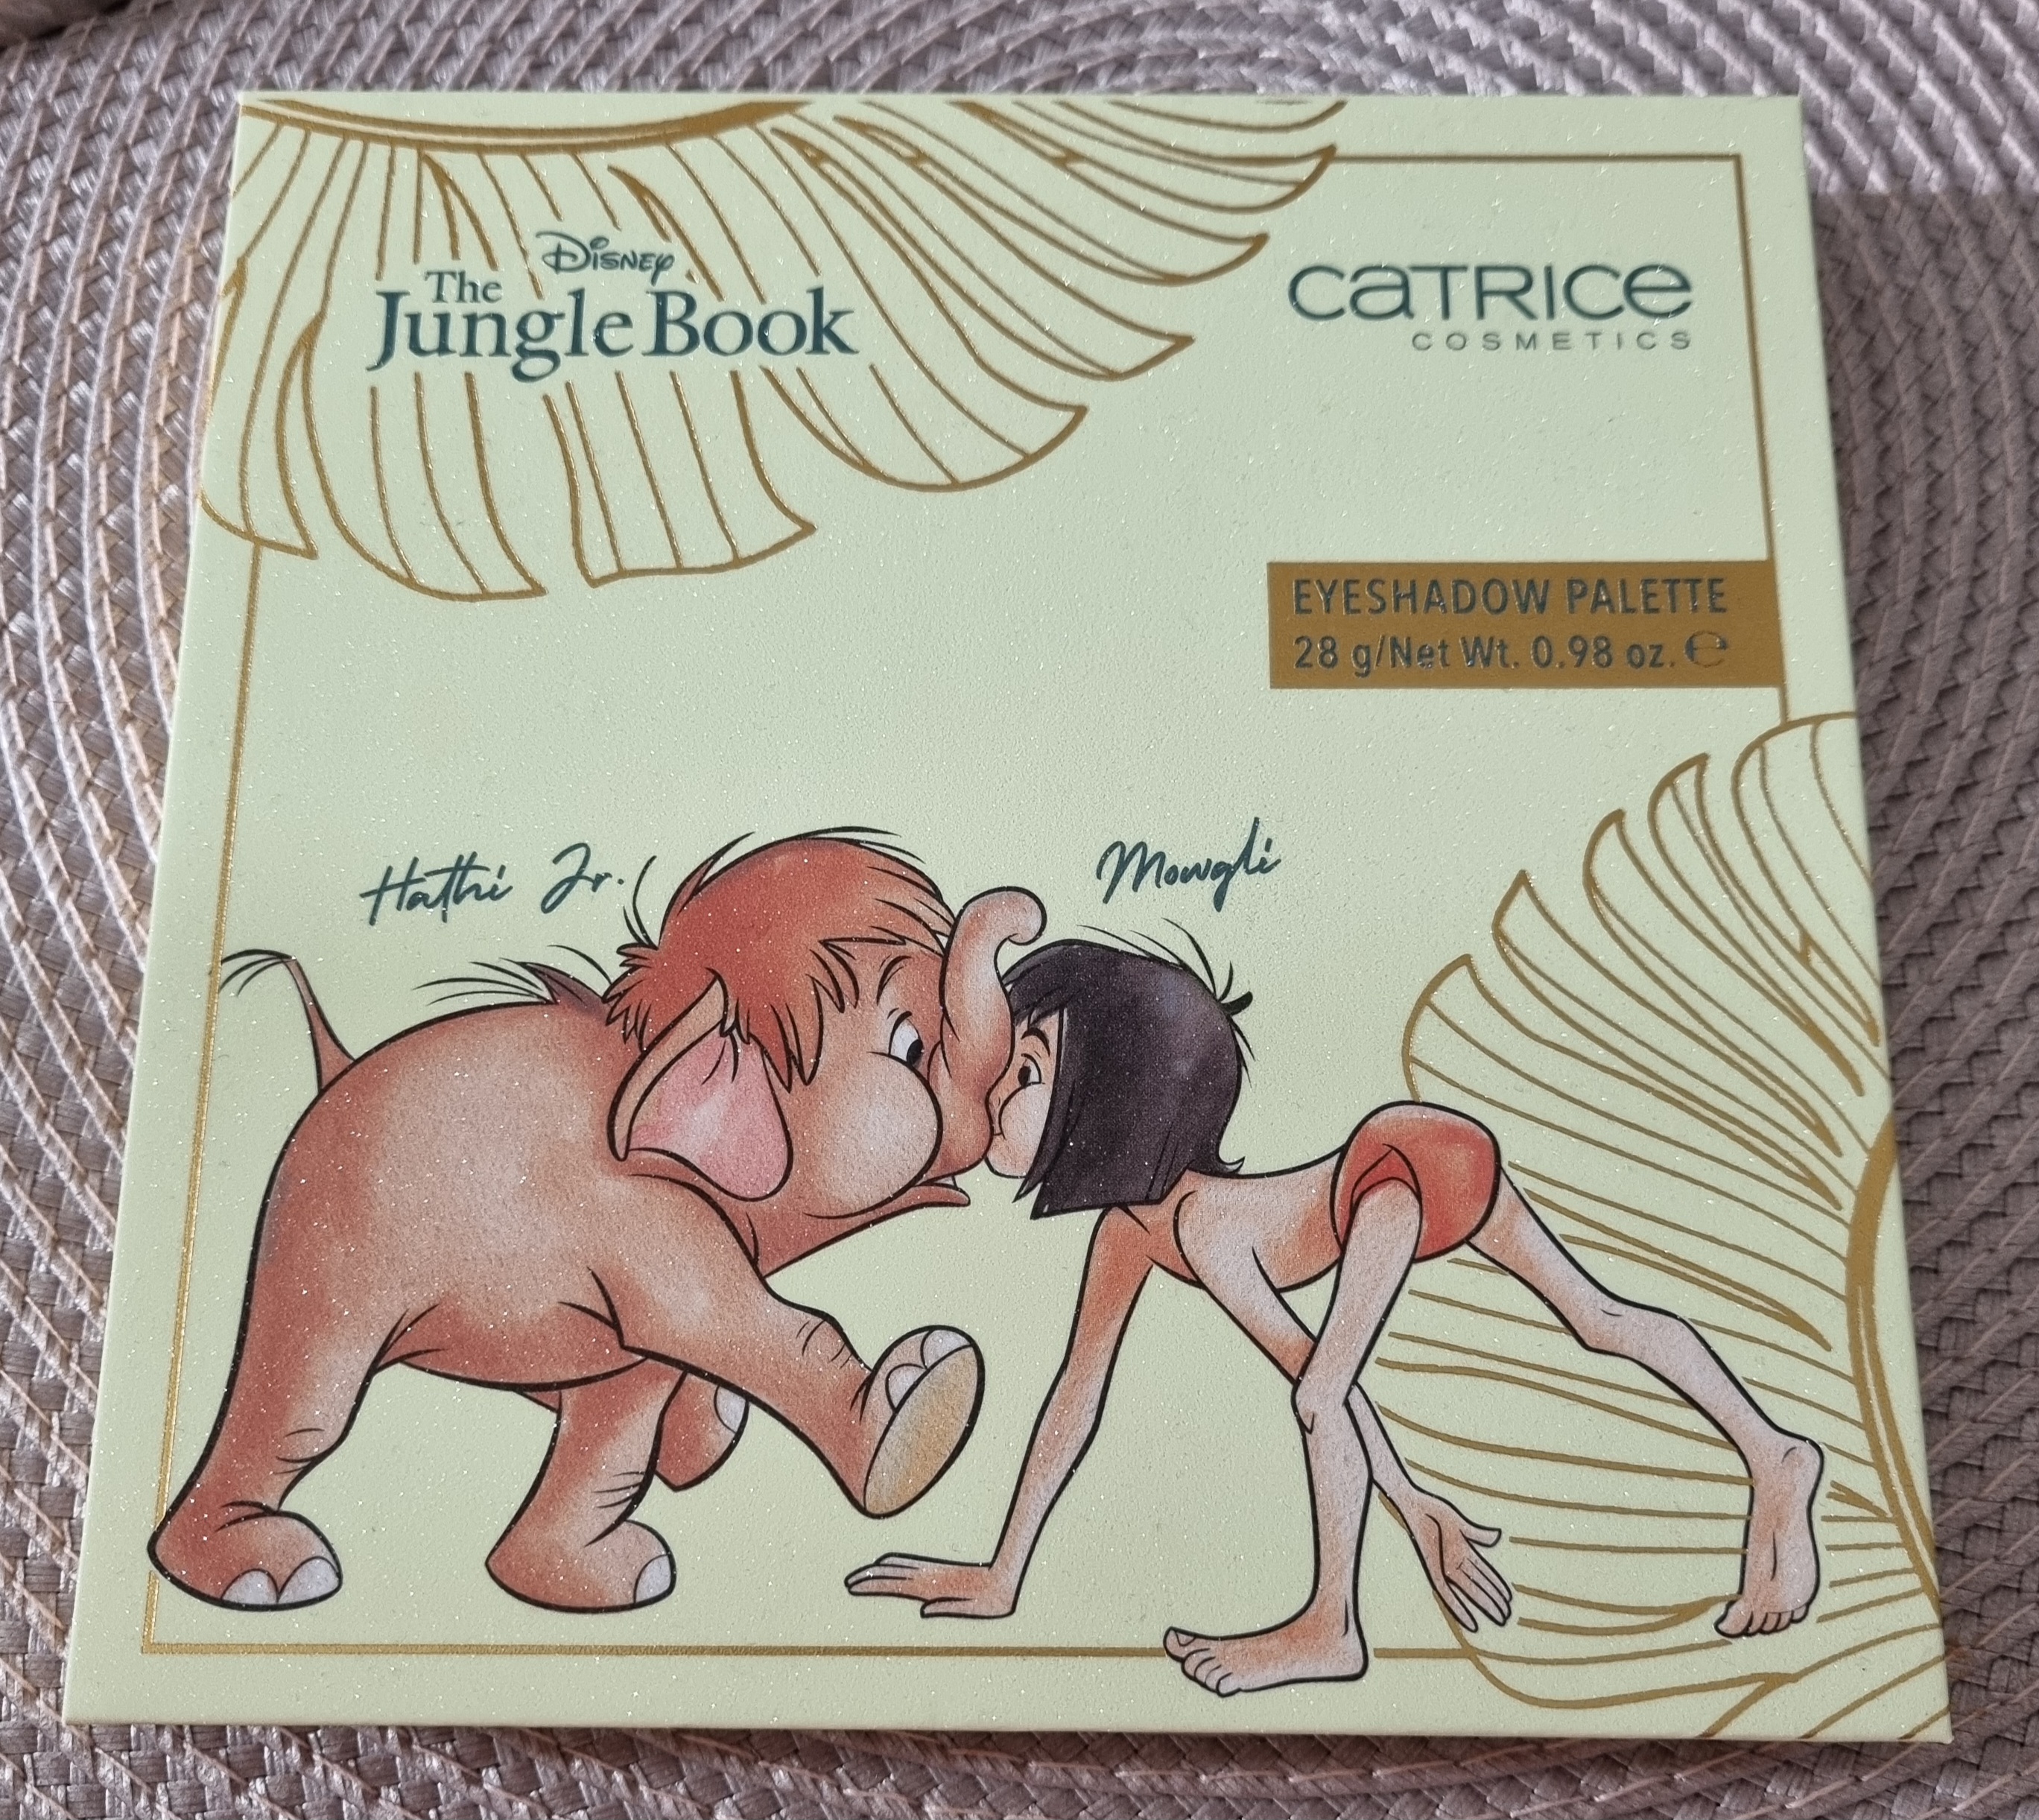 Jungle Jungle The Catrice Disney The Palette Book In 020 Stay Eyeshadow